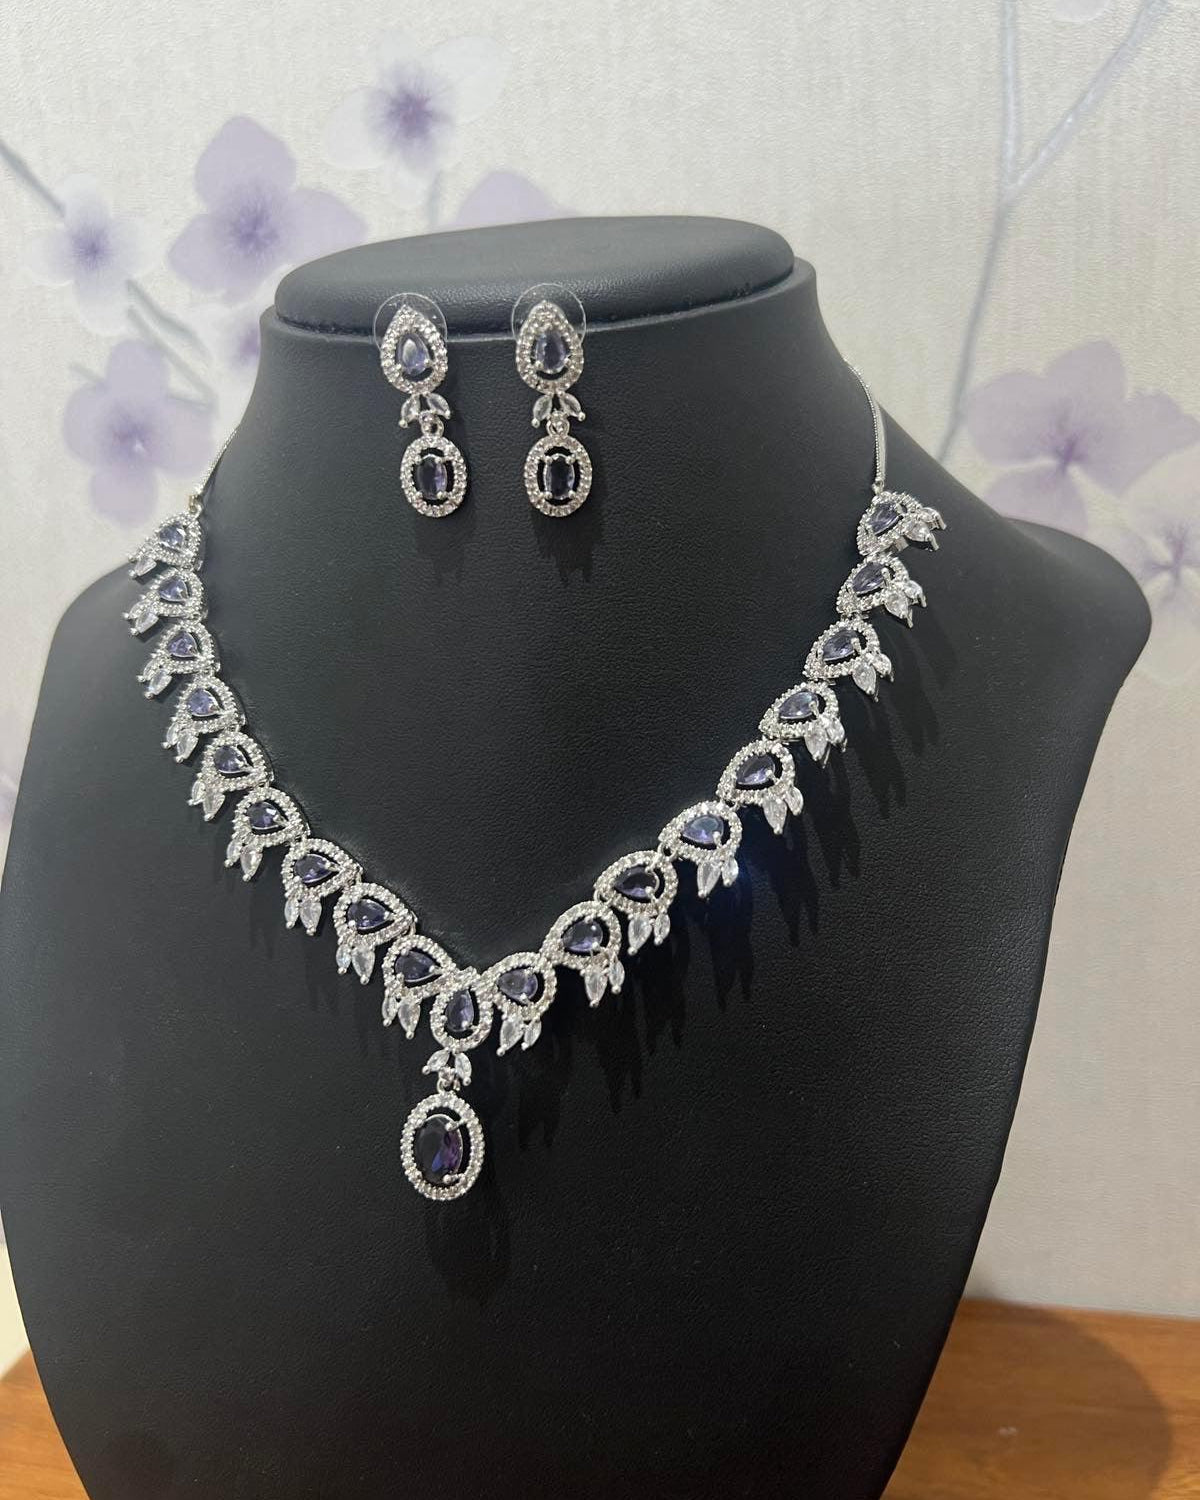 American Diamond Necklace with Lavender Stone - Boutique Nepal